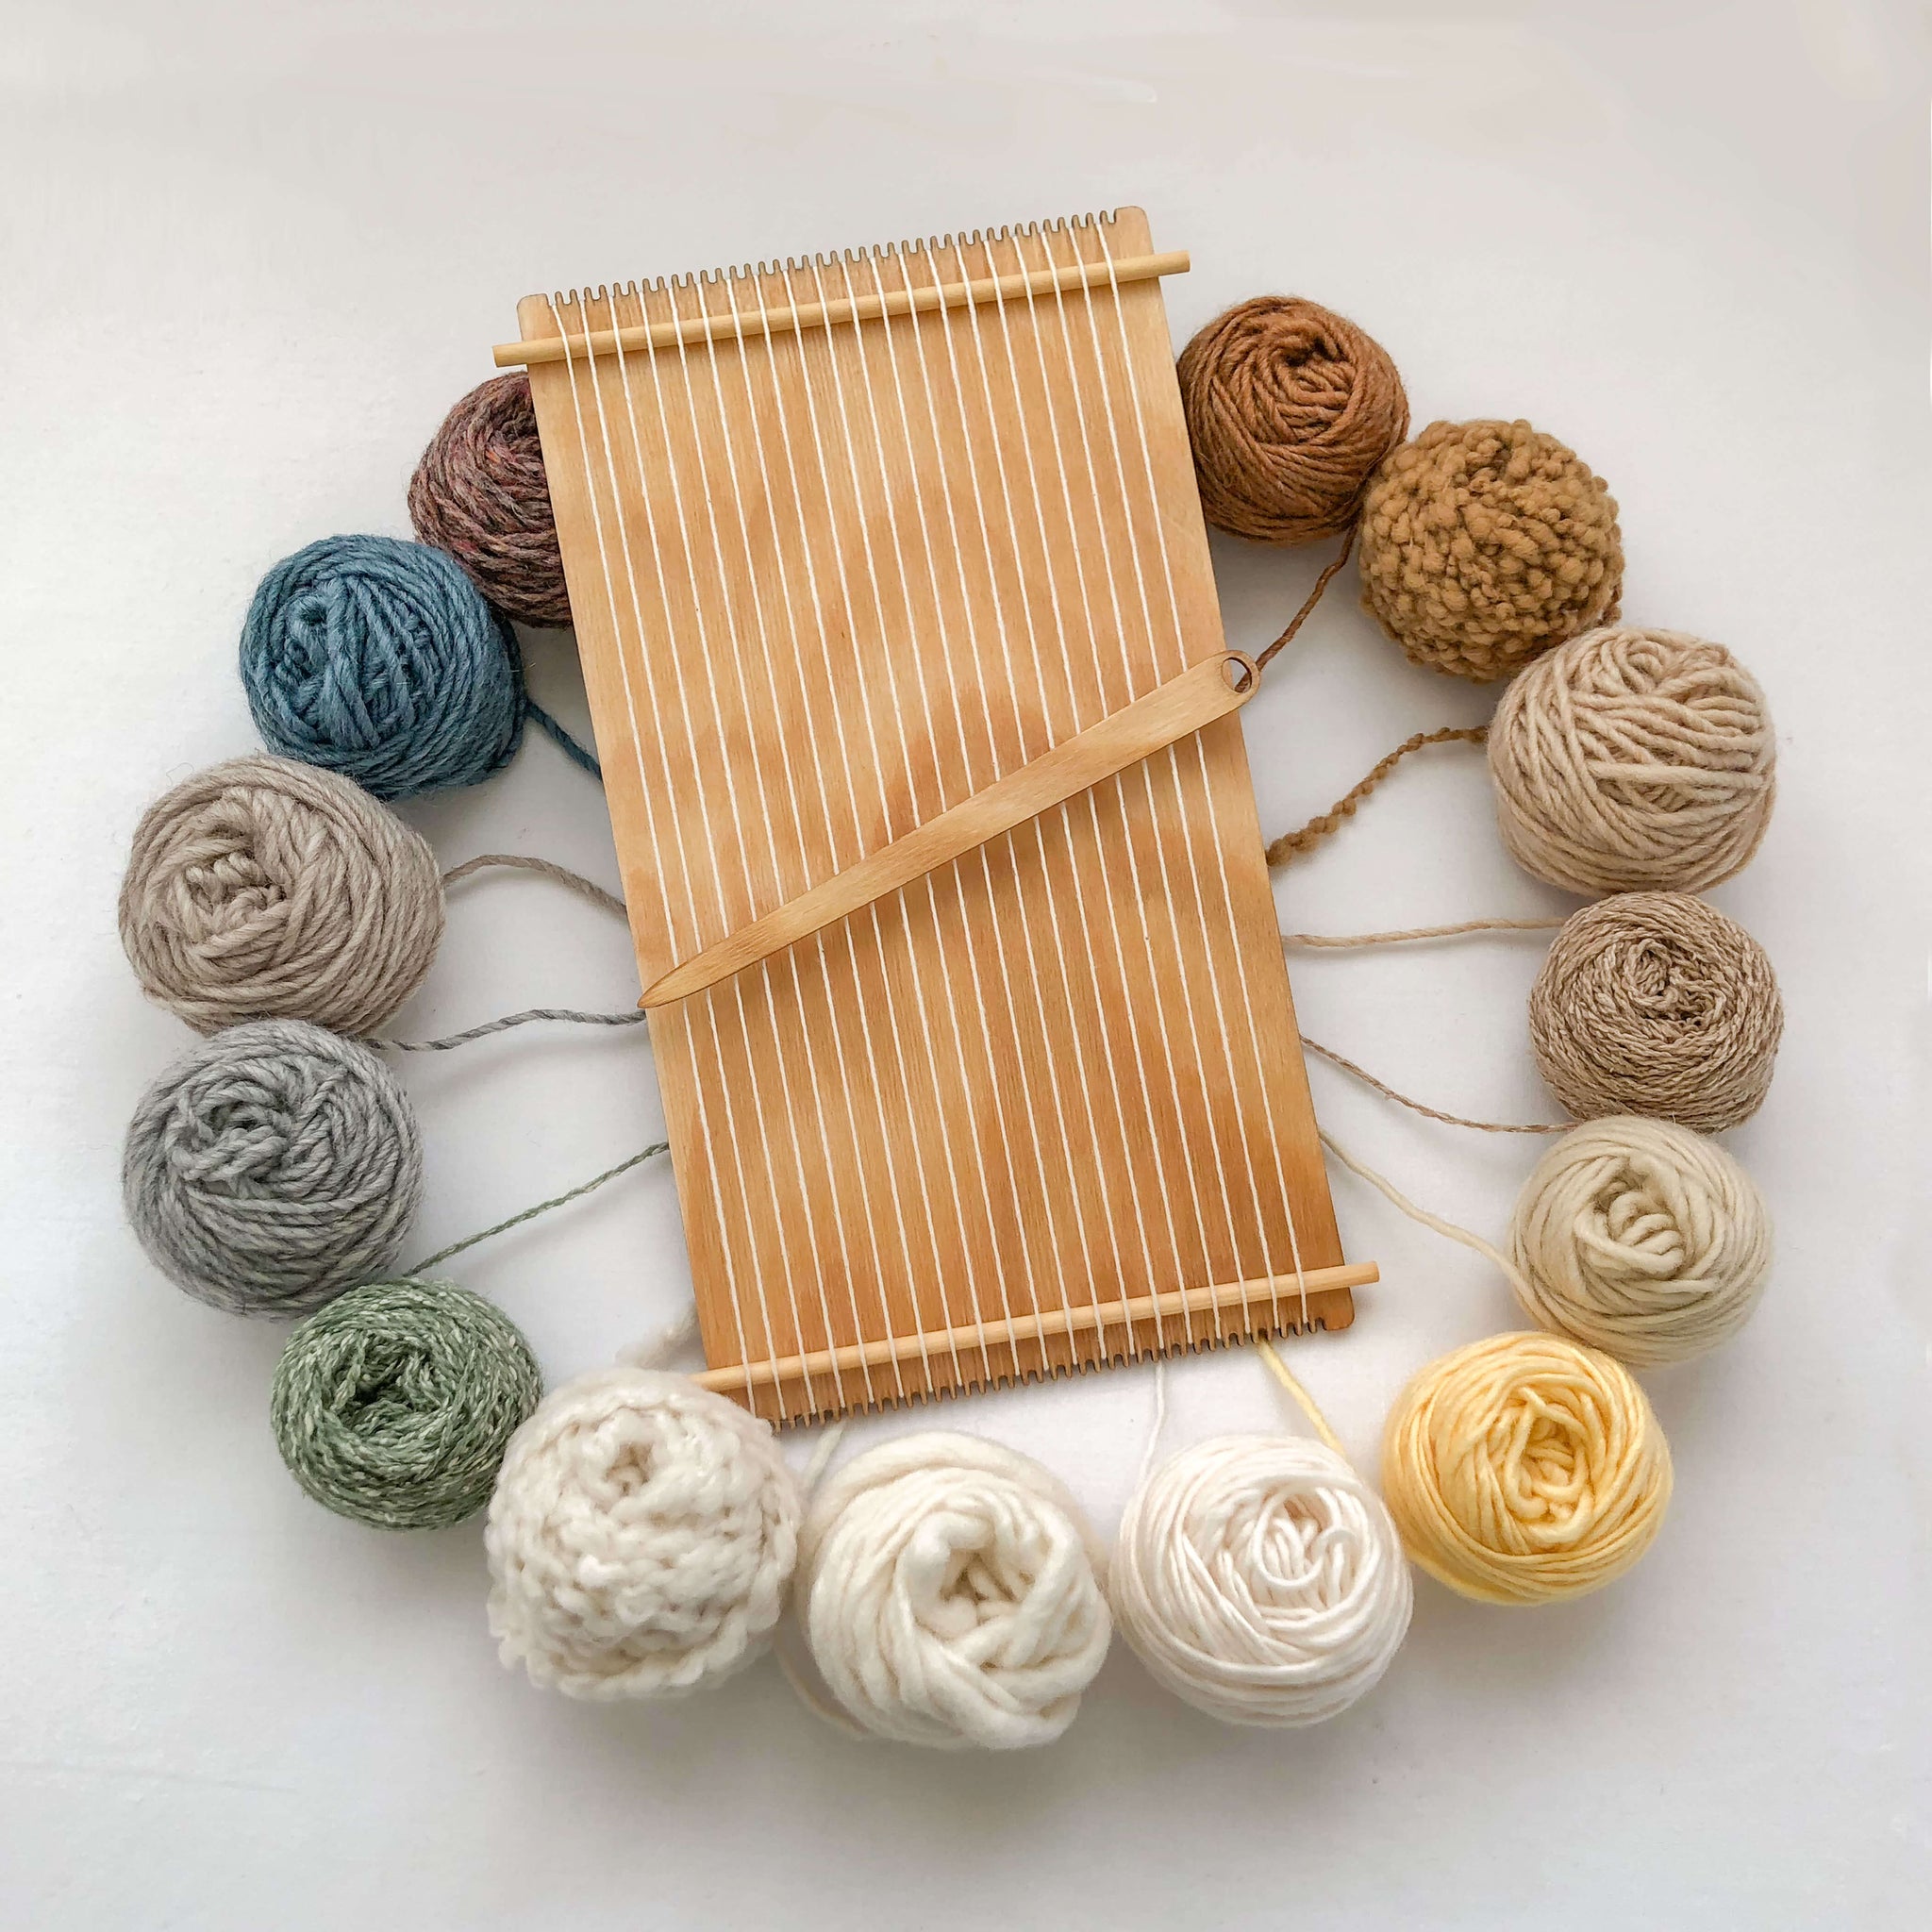 Wool Yarn Kit - Natural Colors - The Creativity Patch - Lucy Jennings